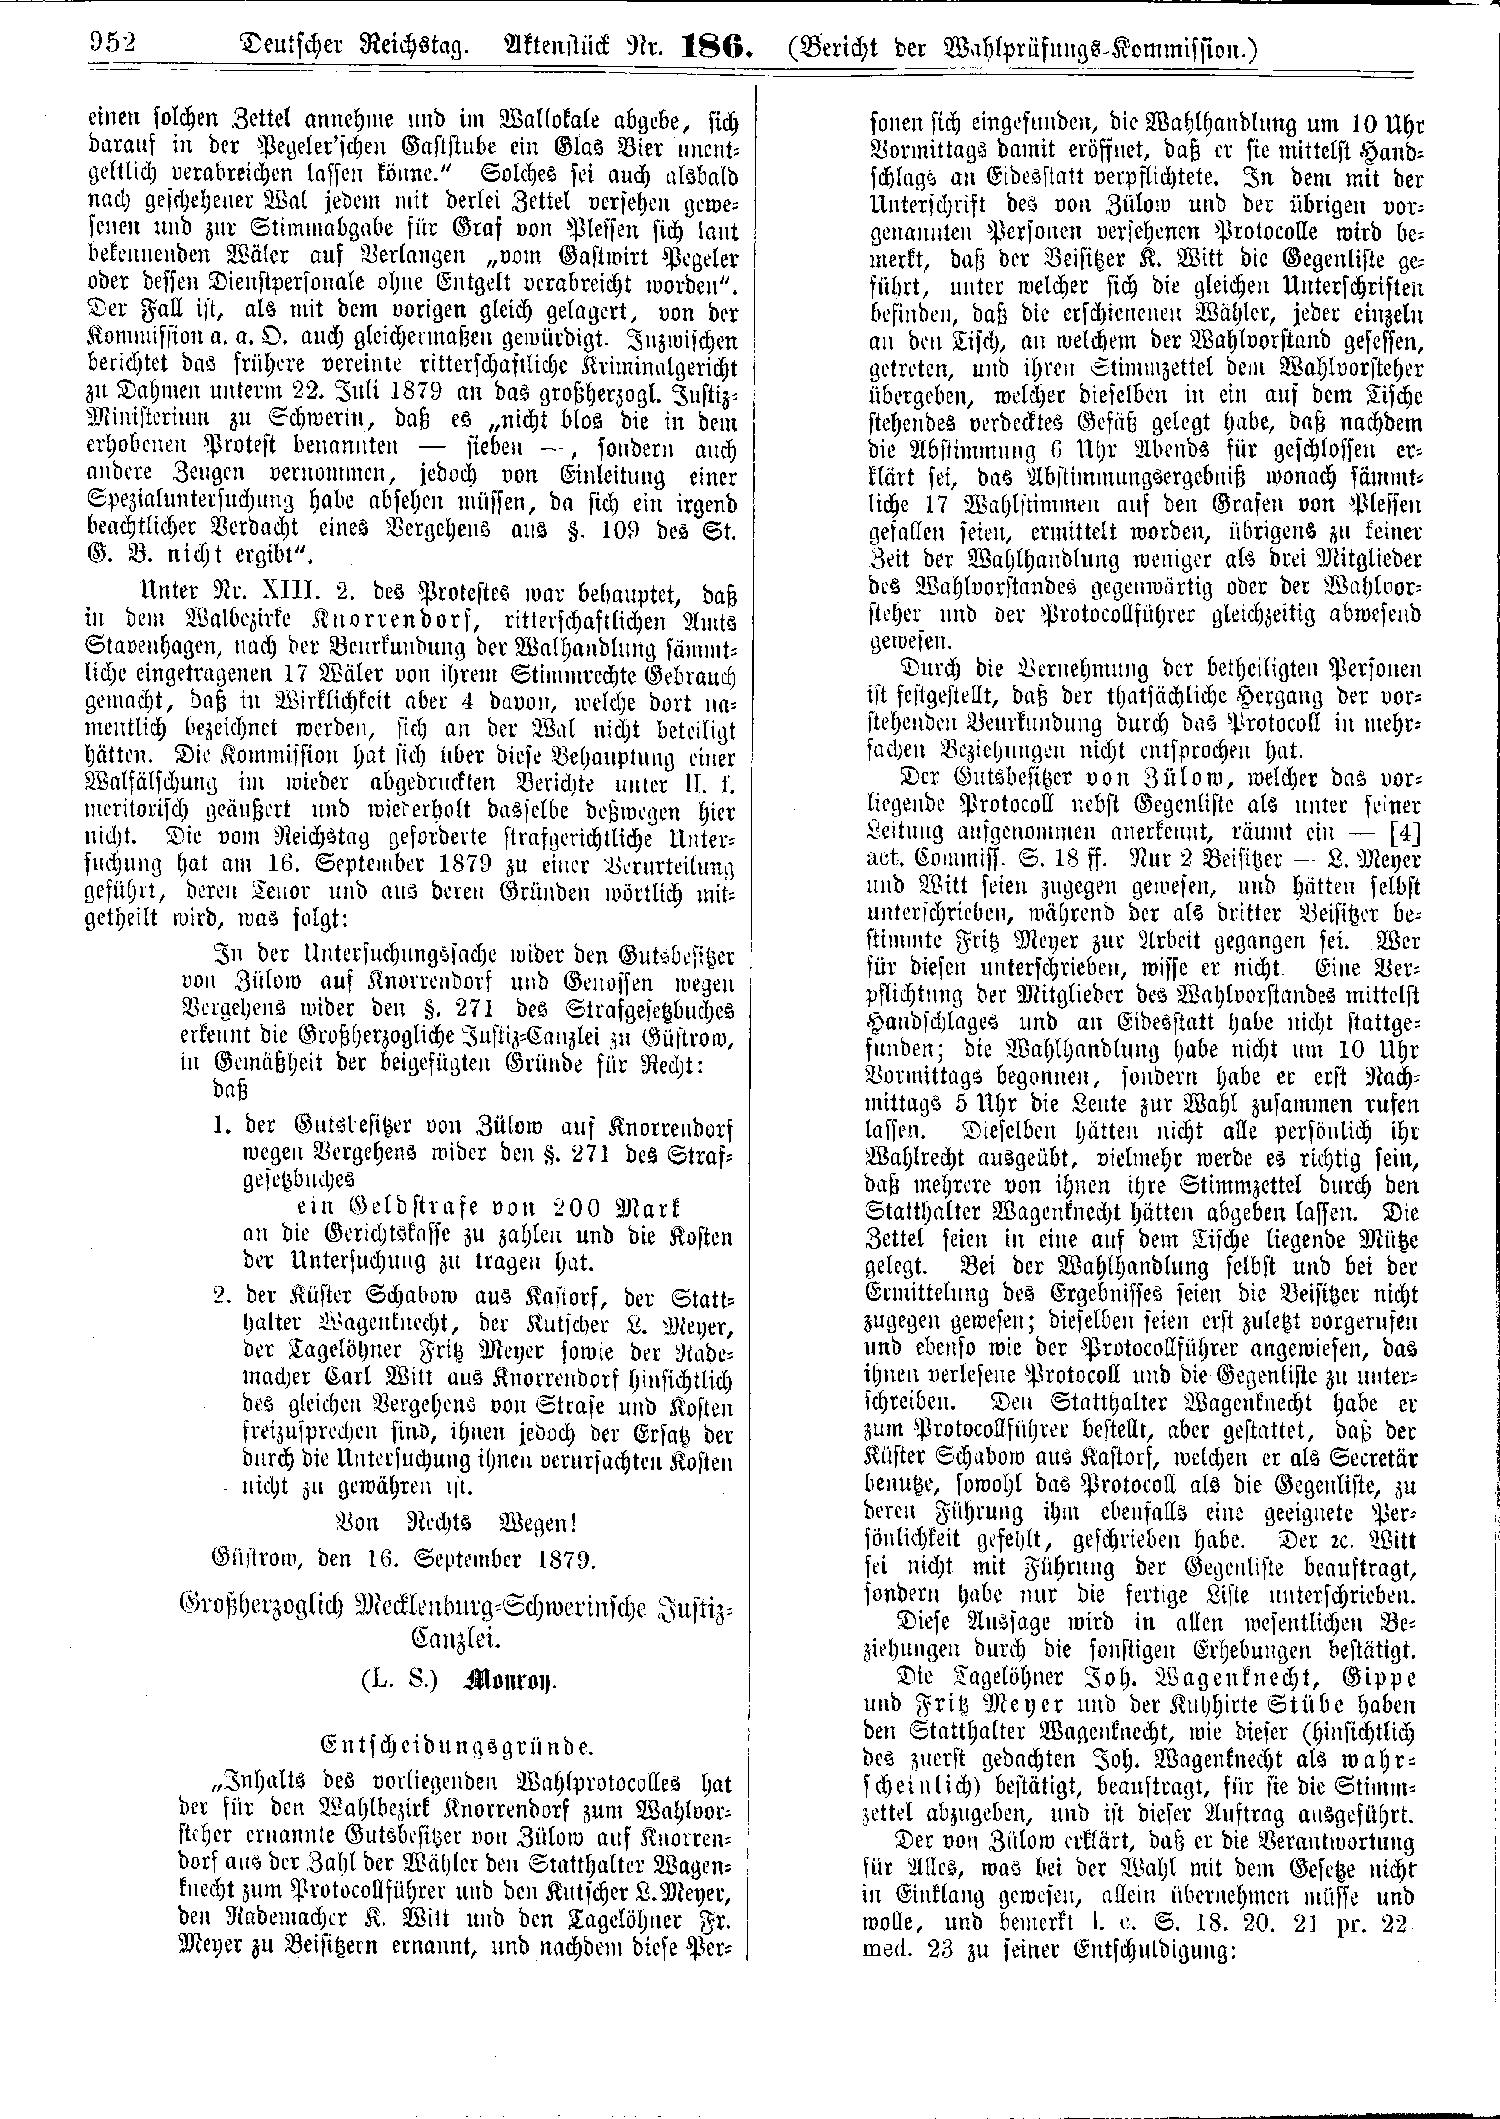 Scan of page 952